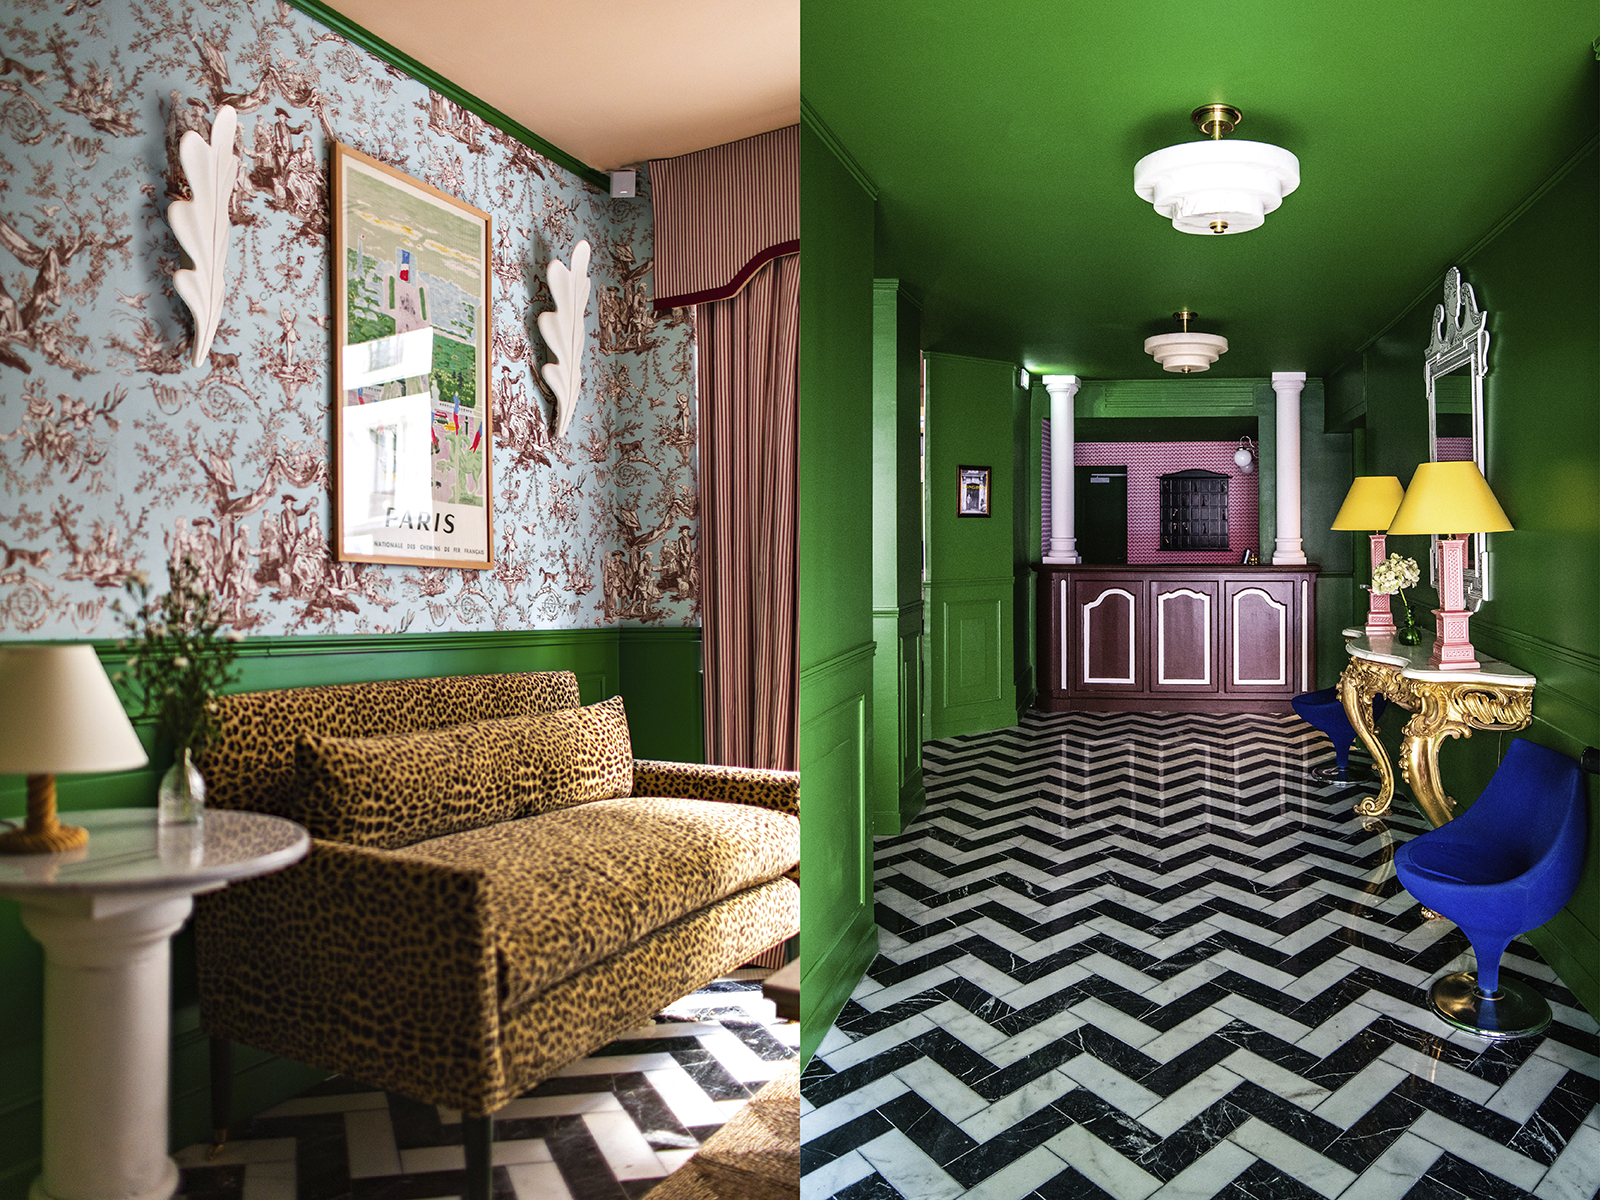 Two images showing a lounge area with patterned wallpaper and the reception desk with walls and ceiling painted in green with a black and white tiled floor